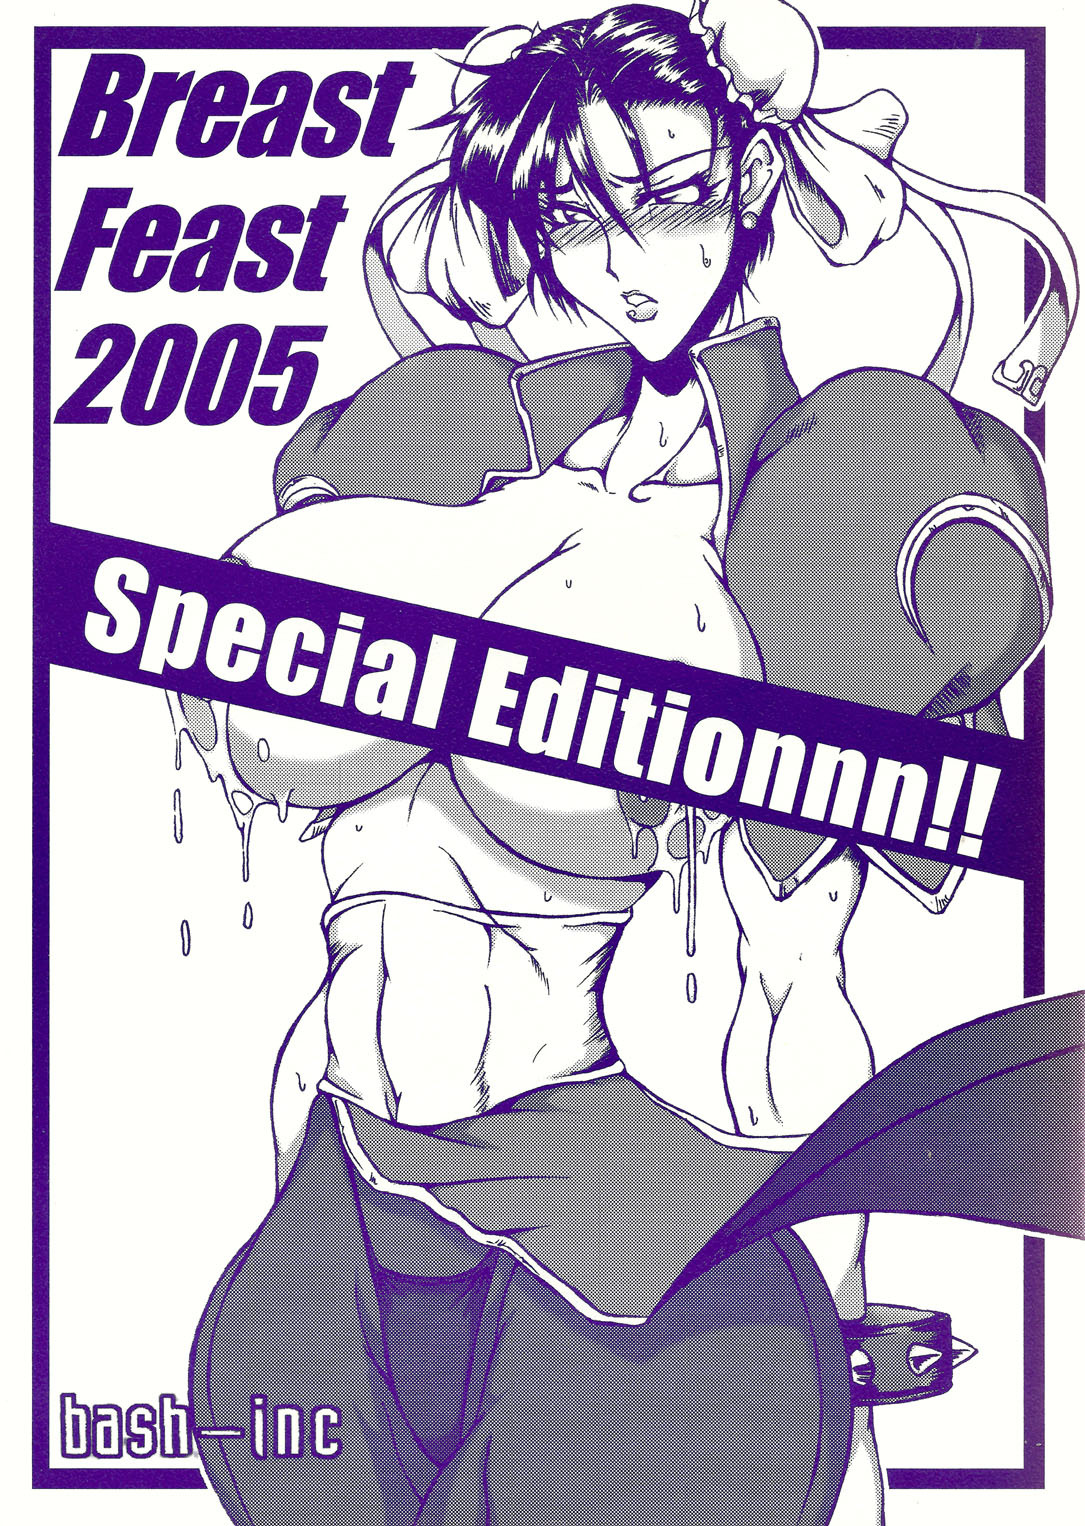 (C69) [bash-inc (BASH)] Breast Feast 2005 (Street Fighter) page 1 full